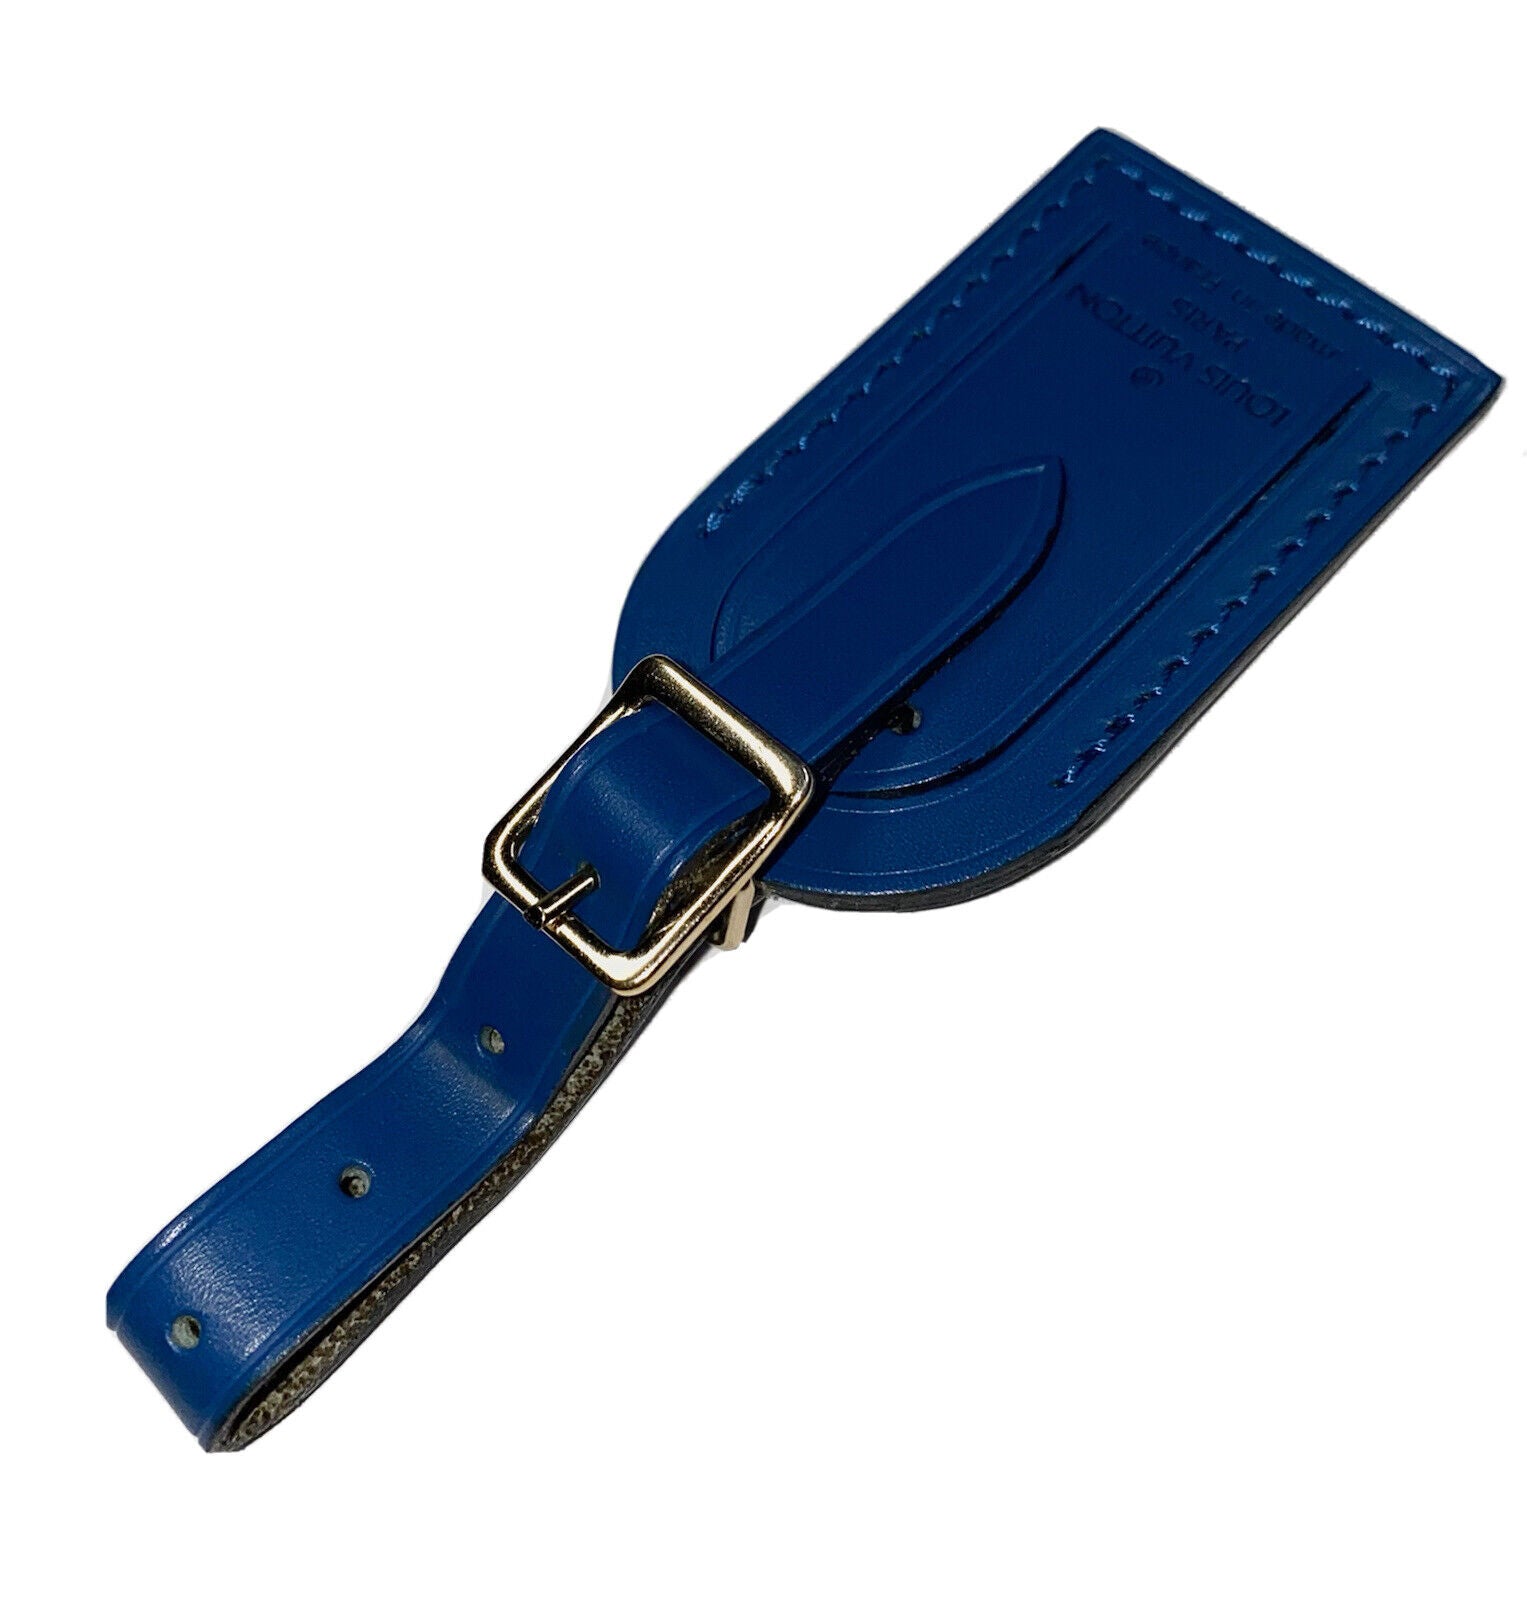 Louis Vuitton Luggage Tag Toledo Blue Small Calfskin Leather - No Initials